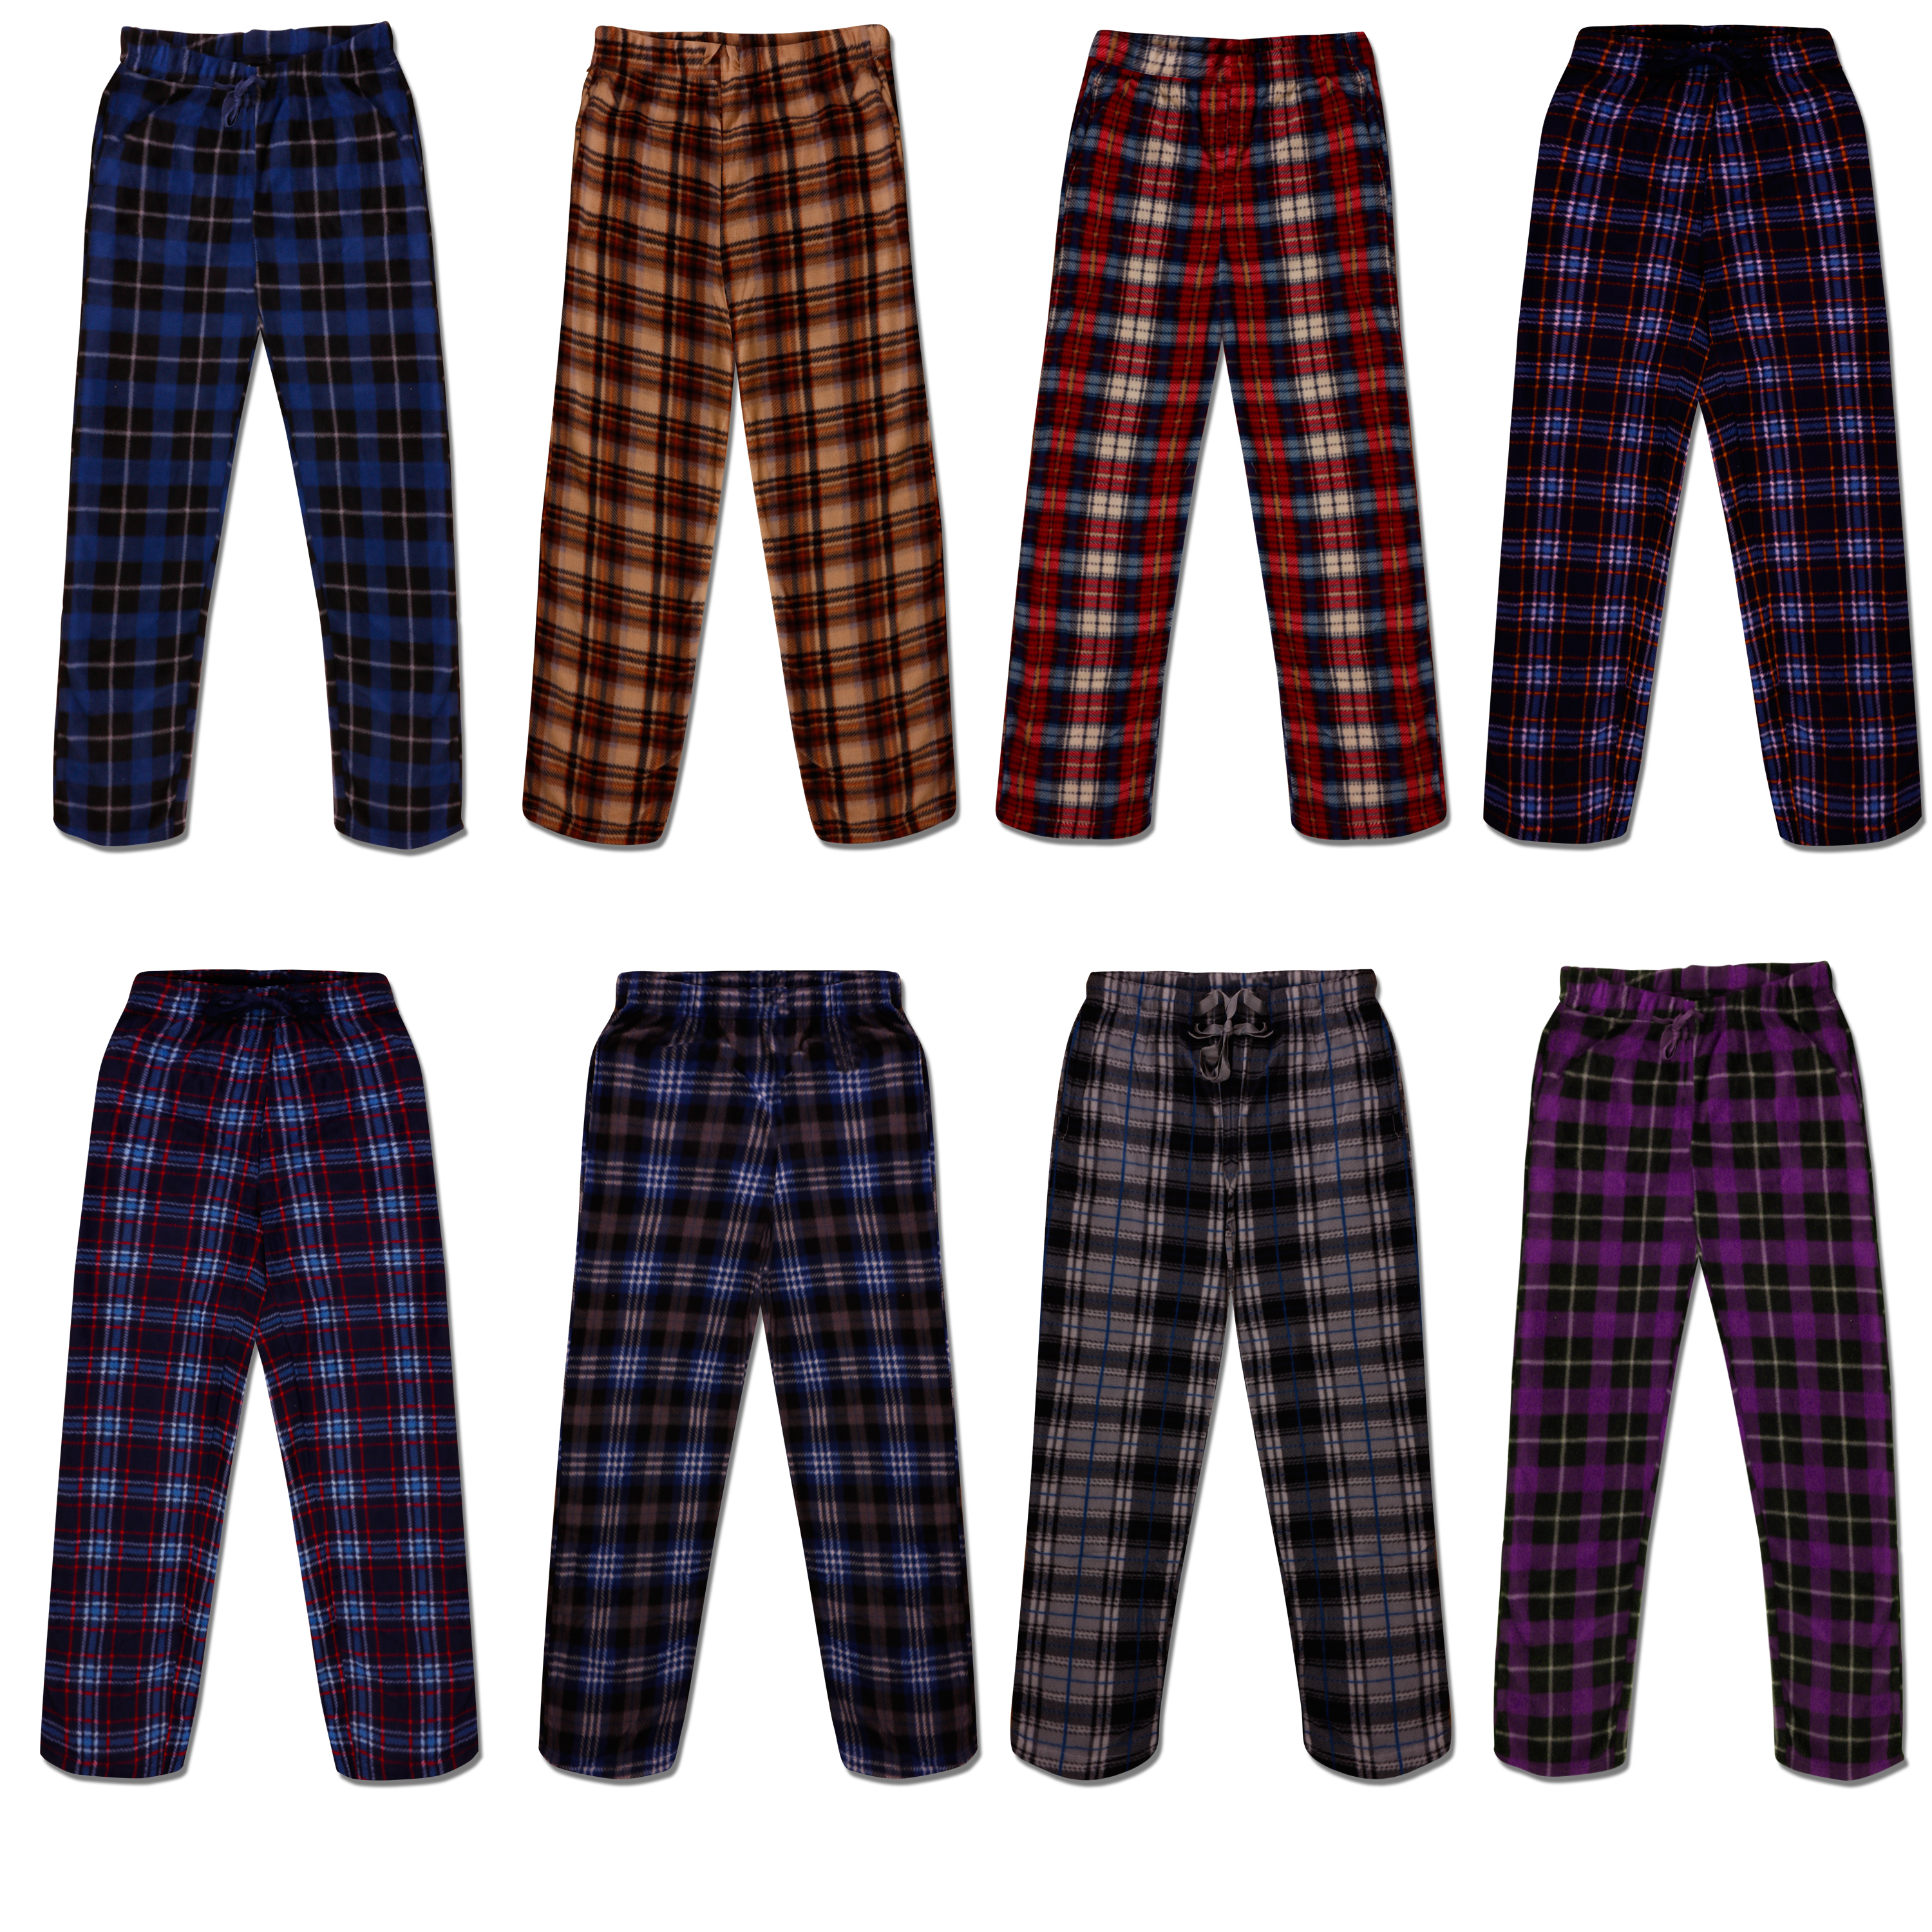 Multi-Pack: Men's Ultra Soft Flannel Plaid Pajama Lounge Pants - 1-Pack, XX-Large